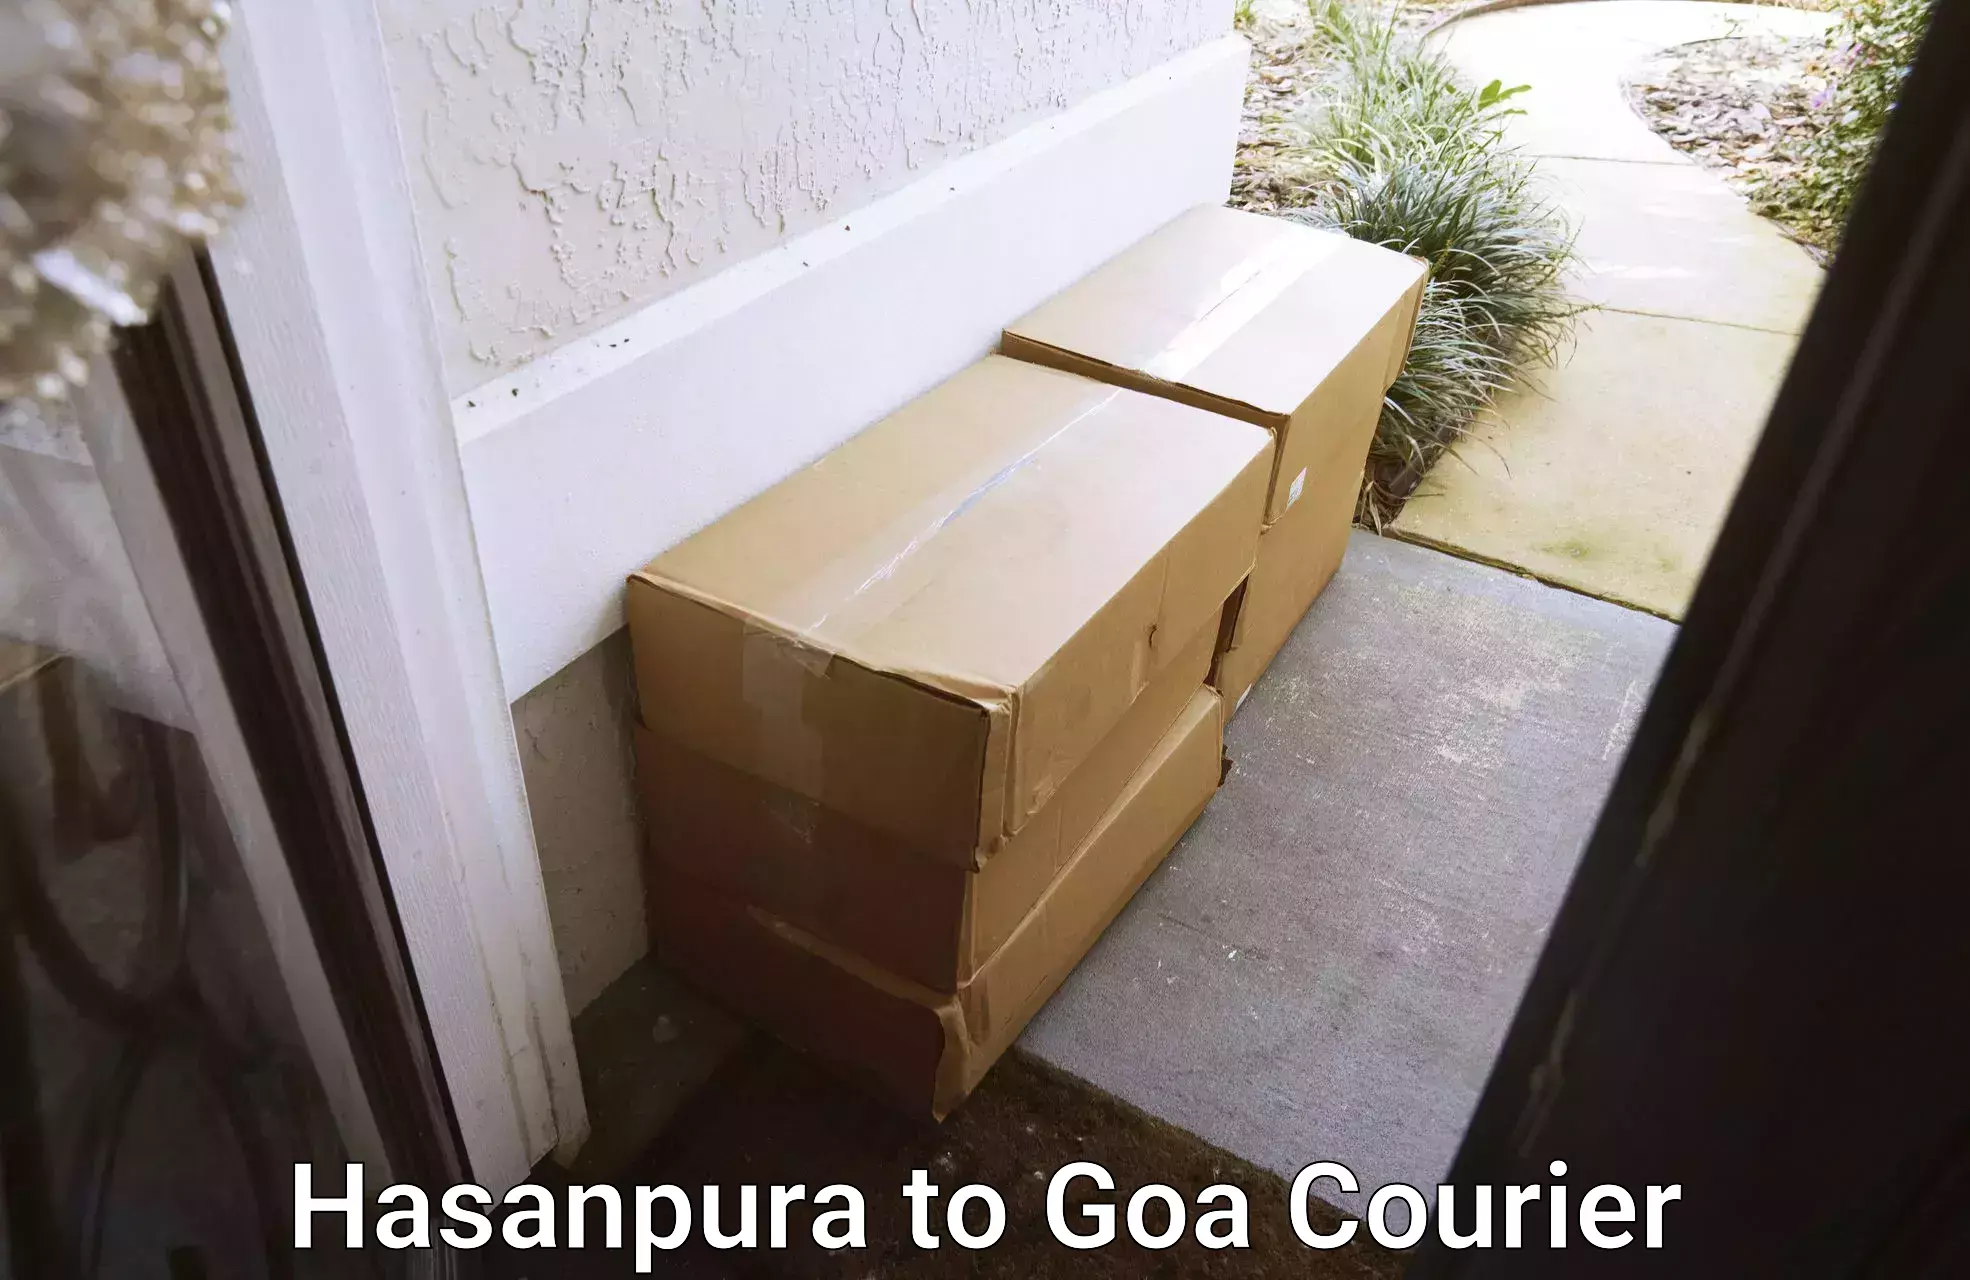 Quality furniture shipping in Hasanpura to South Goa